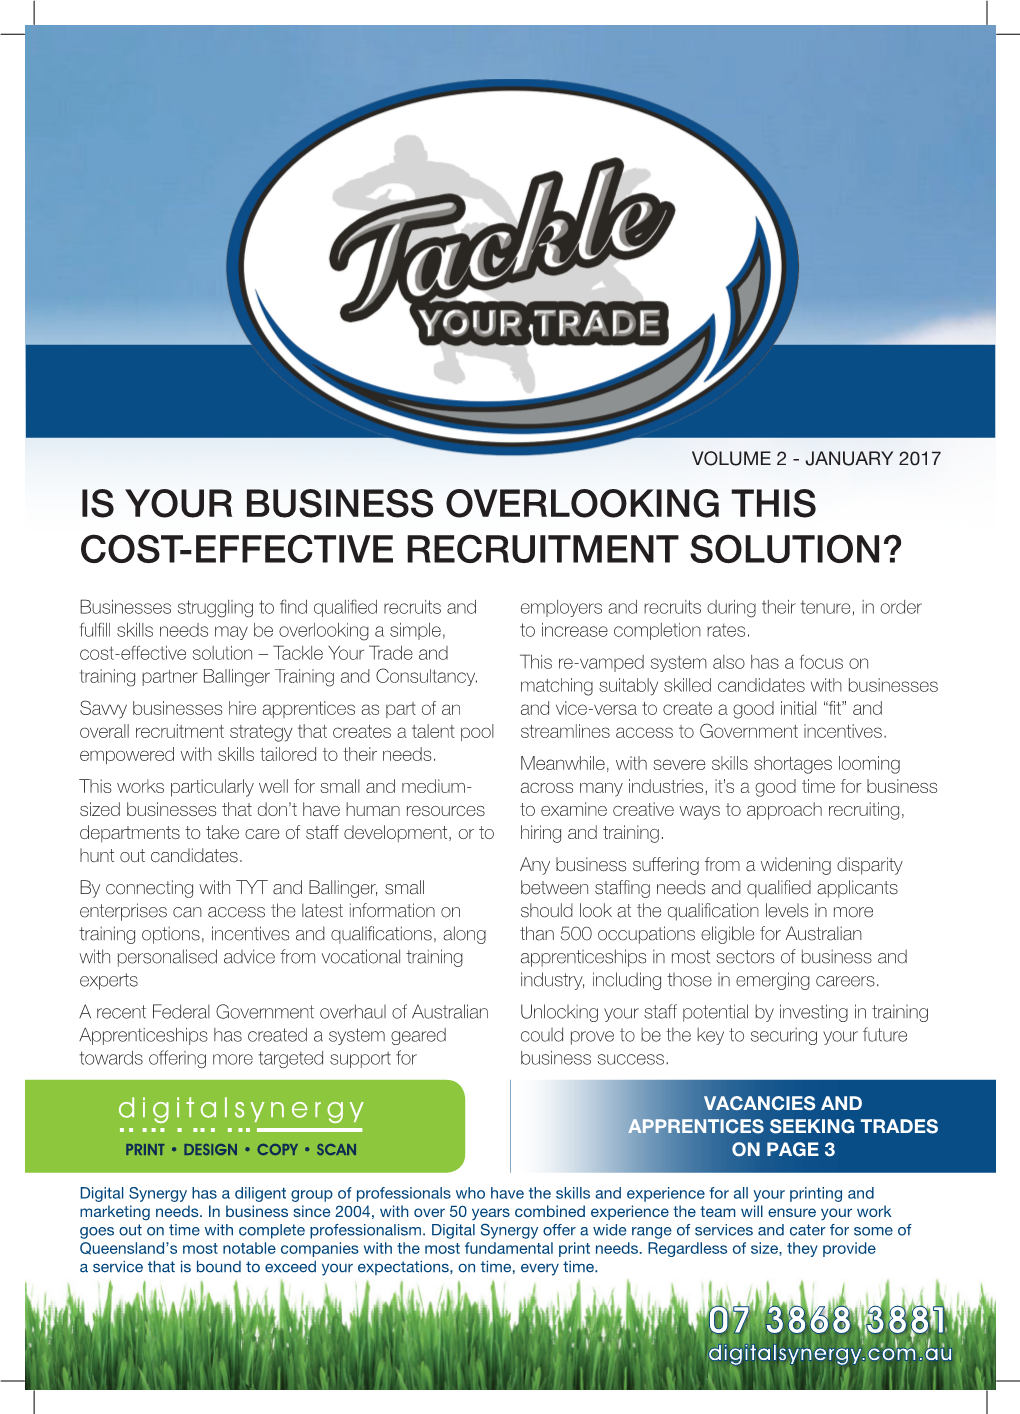 Is Your Business Overlooking This Cost-Effective Recruitment Solution?